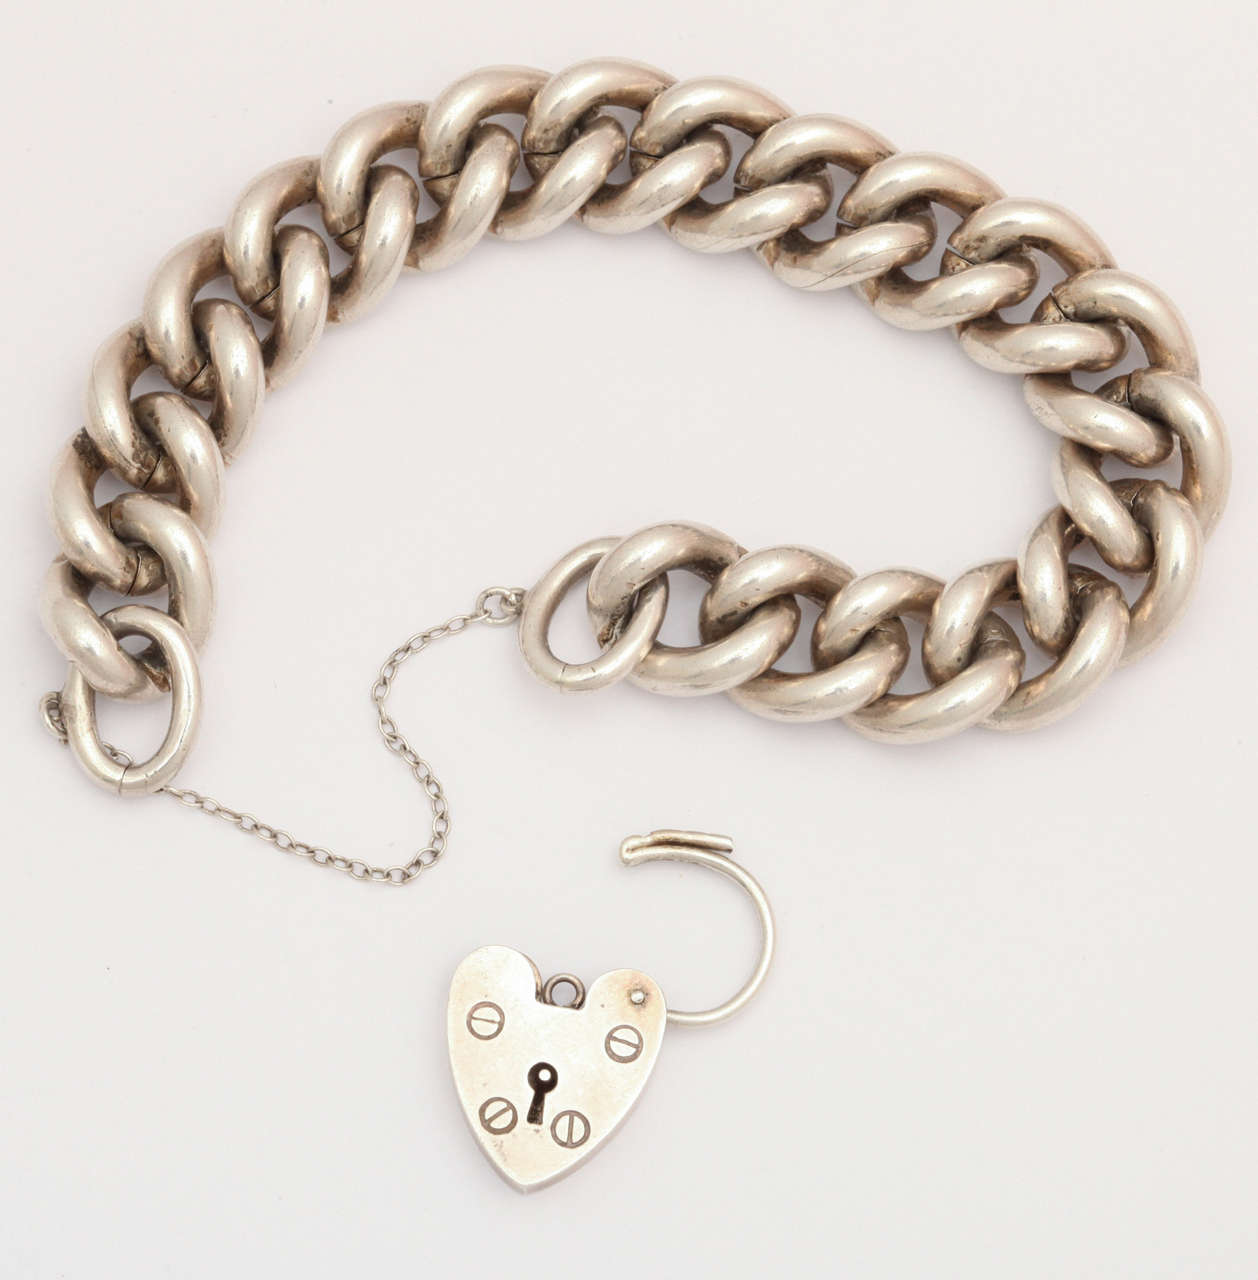 A solid silver curb link bracelet from Birmingham, England holds a padlock clasp in the form of a heart.  The bracelet, heavier than most of its kind, is sturdy enough for a man and handsome aplenty for a lady. The curb link form is tactile, feels